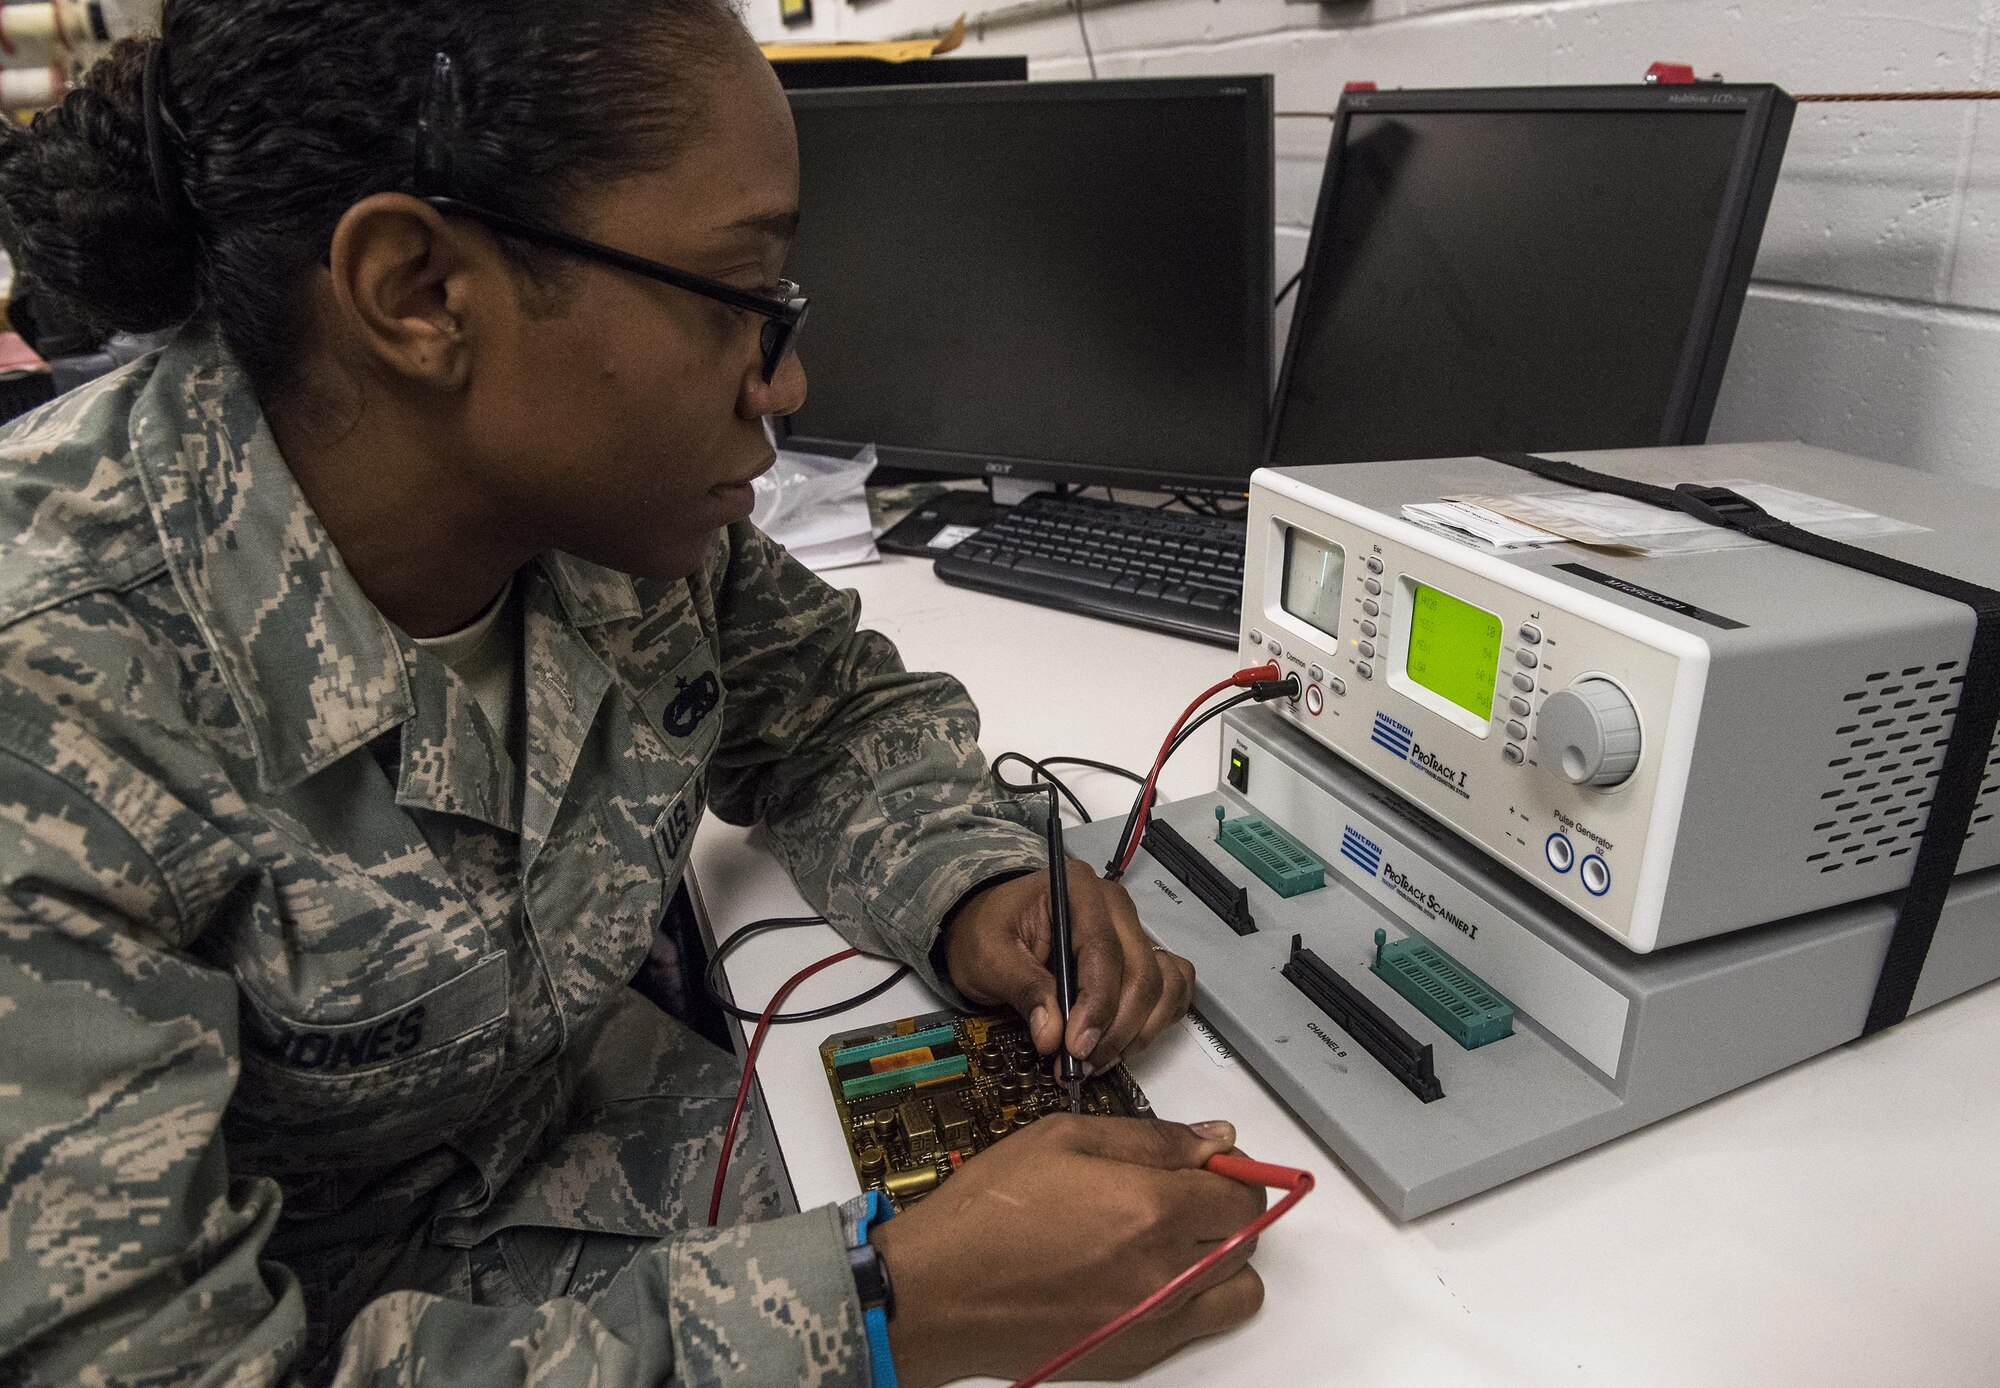 Staff Sgt. Alexandria Jones, 23d Maintenance Group Air Force Repair Enhancement Program Technician, uses a HUNTRON machine to check circuit board readings, Jan. 30, 2017, at Moody Air Force Base, Ga. The machine tests the signals that the diodes and resistors give off. Technicians then use a database to compare the circuit board’s current reading with readings of properly functioning boards so they can find and fix the problem efficiently. (U.S. Air Force photo by Airman 1st Class Janiqua P. Robinson)